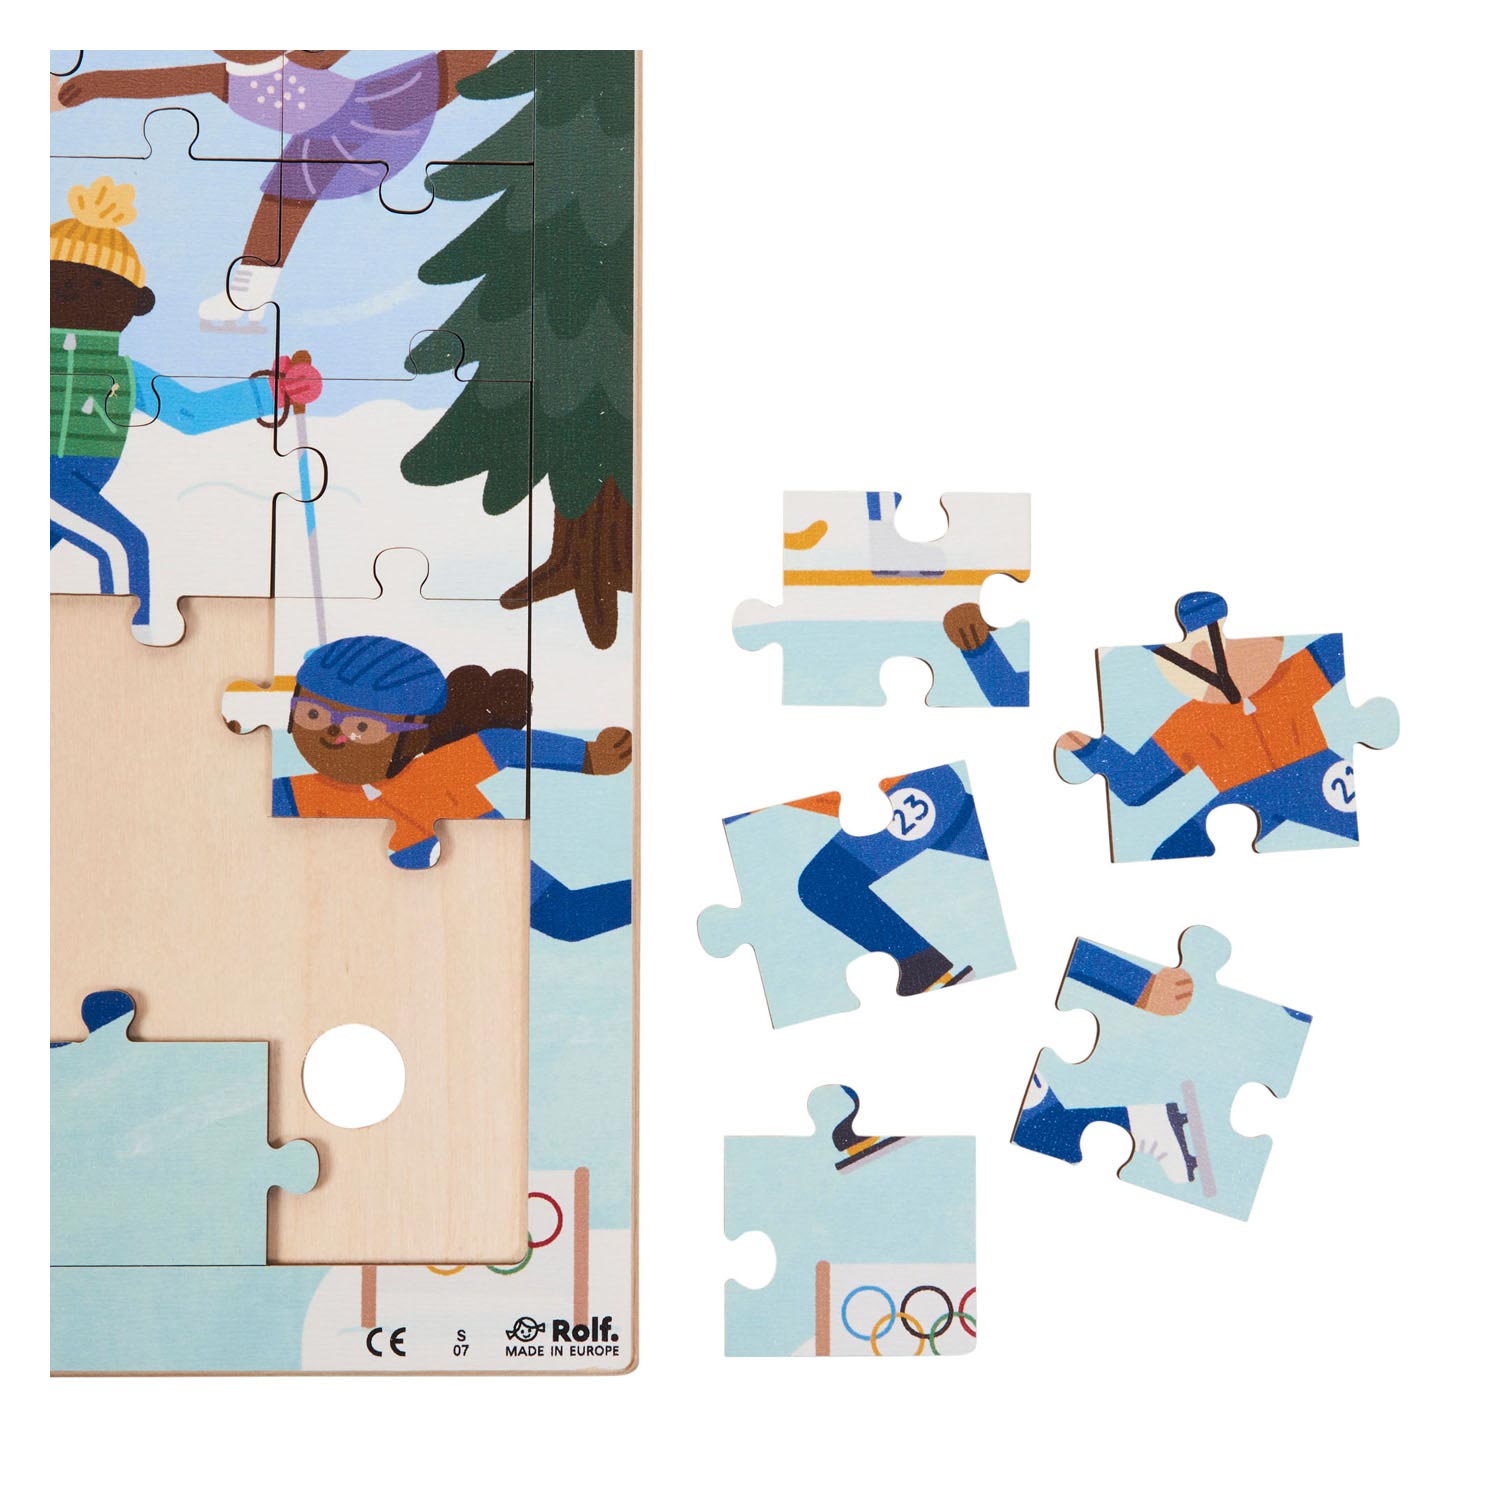 Rolf - Holzpuzzle Winterspiele, 72 Teile.